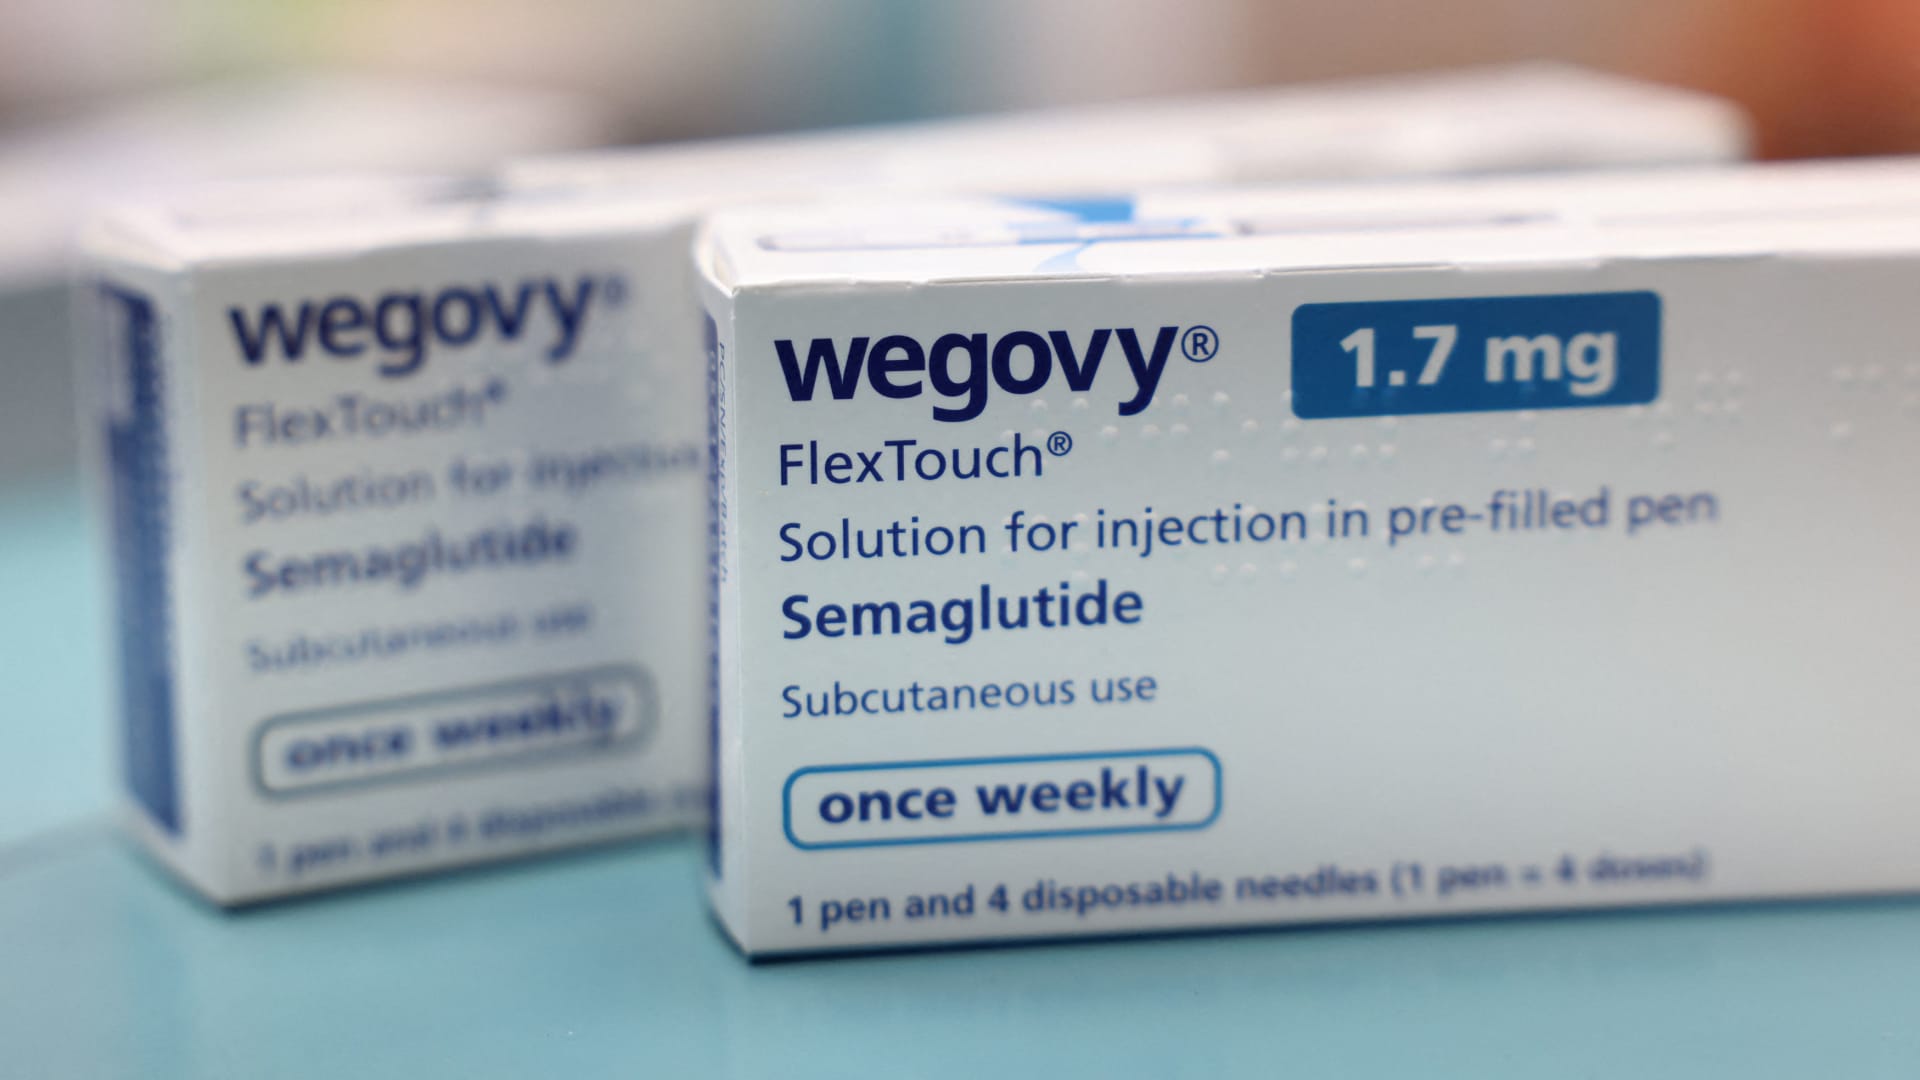 Wegovy patients maintain weight loss for 4 years: Novo Nordisk study